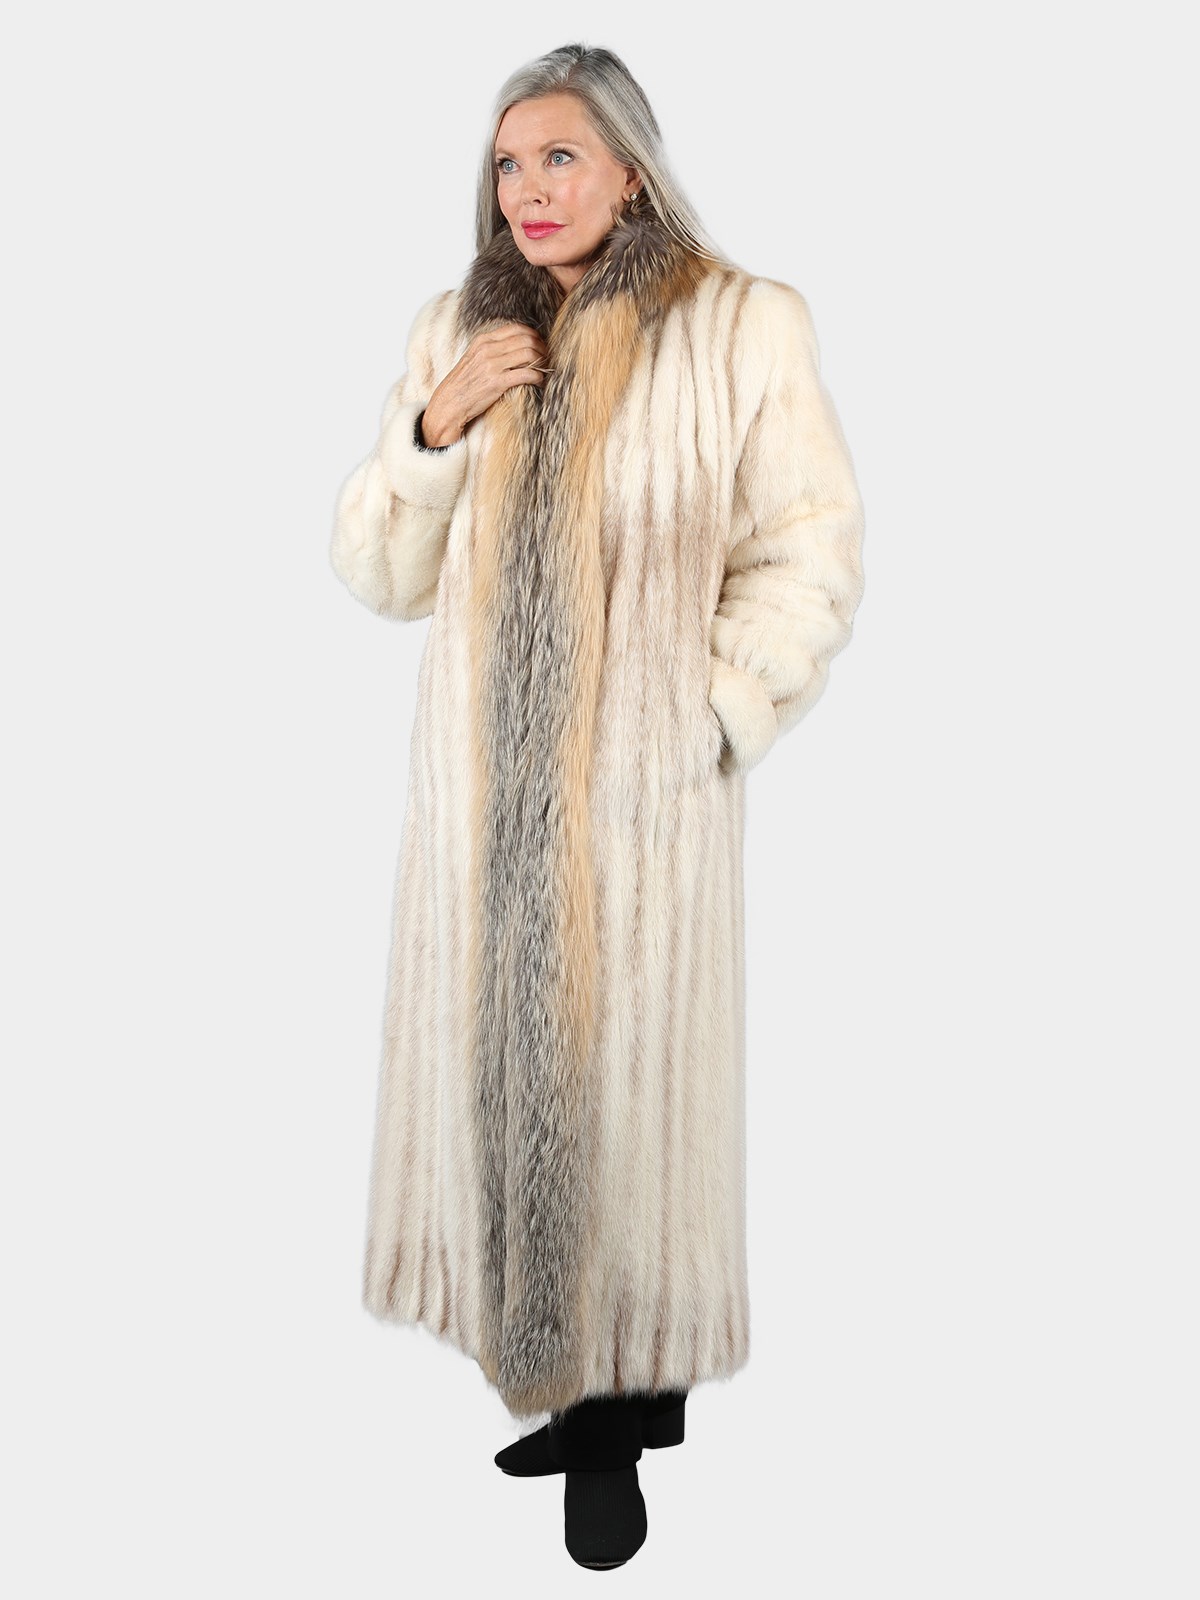 Woman's Natural Brown Cross Female Mink Fur Coat with Golden Isle Fox Tuxedo Front